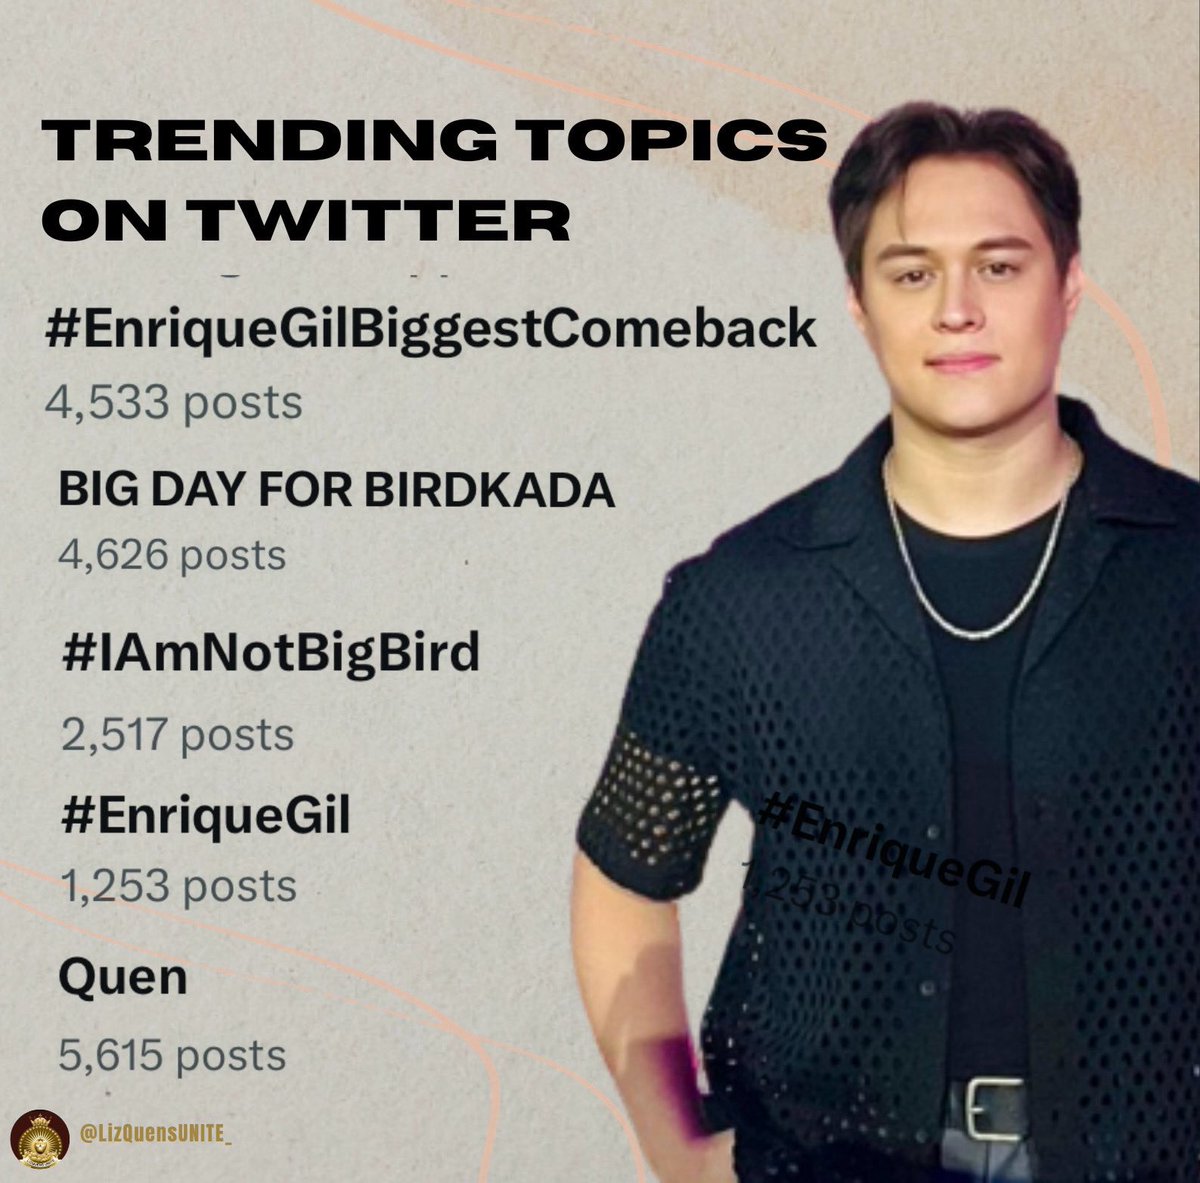 🐦 | WE TRENDED ! 

Appreciation tweet to everyone who joined our twitter party for #BigBirdTeaser especially to the casual fans who took their precious time tweeting with us. 💙

BIG DAY FOR BIRDKADA
#EnriqueGilBiggestComeback 

#EnriqueGil | @itsenriquegil